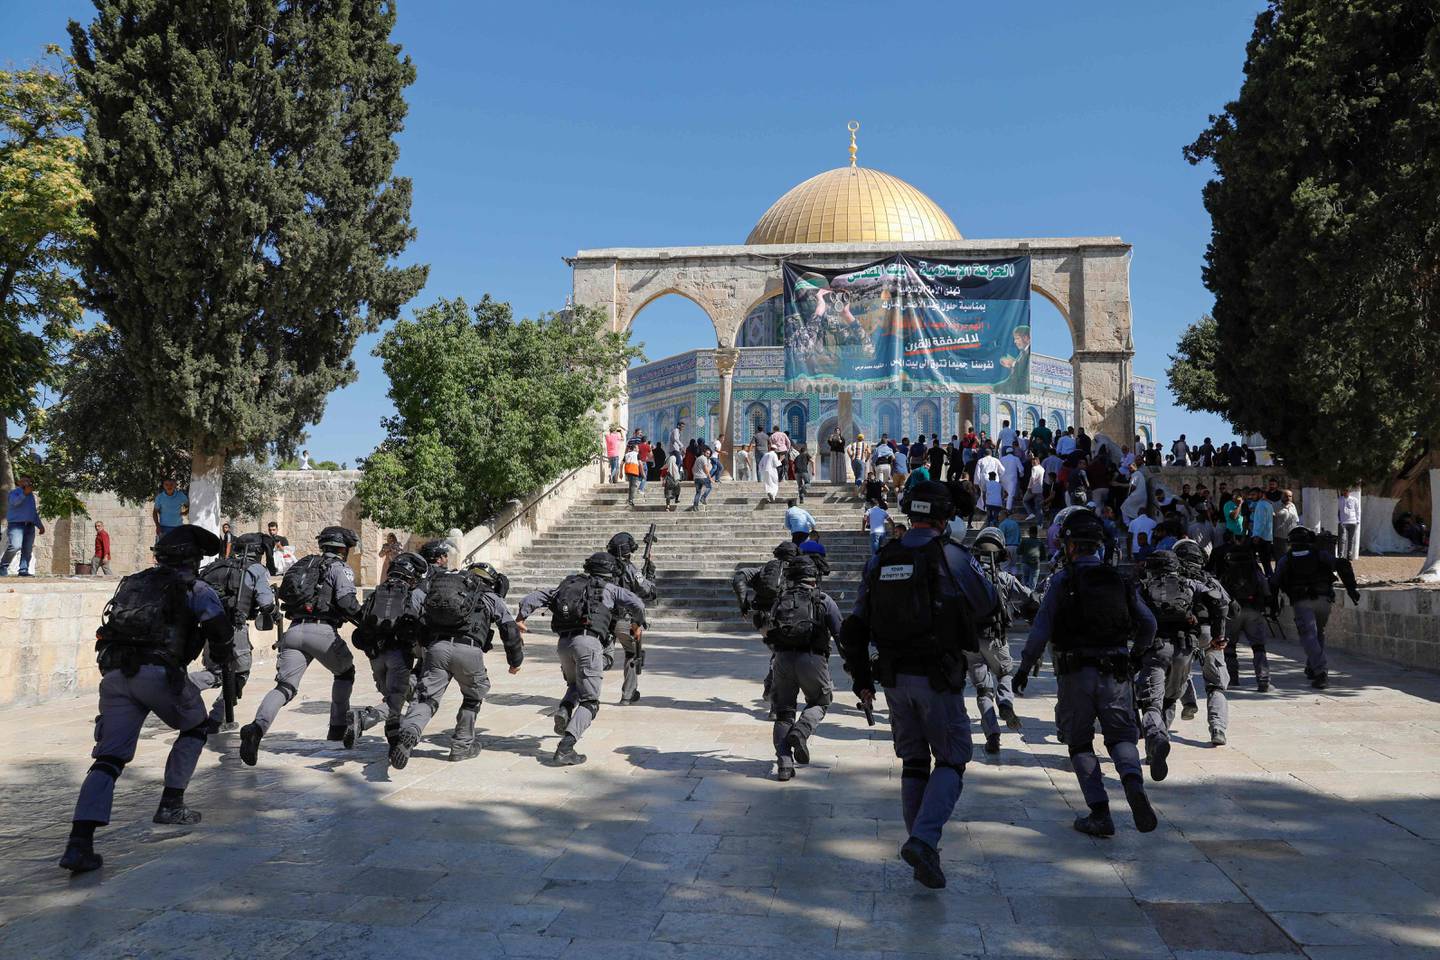 Israeli security forces arrive at the al-Aqsa Mosque compound in the Old City of Jerusalem on August 11, 2019, as clashes broke out during the overlapping Jewish and Muslim holidays of Eid al-Adha and the Tisha B'av holiday inside the historic compound which is considered the third-holiest site in Islam and the most sacred for Jews, who revere it as the location of the two biblical-era temples. The compound, which includes the Al-Aqsa mosque and the Dome of the Rock, is one of the most sensitive sites in the Israeli-Palestinian conflict. 
 / AFP / Ahmad GHARABLI
